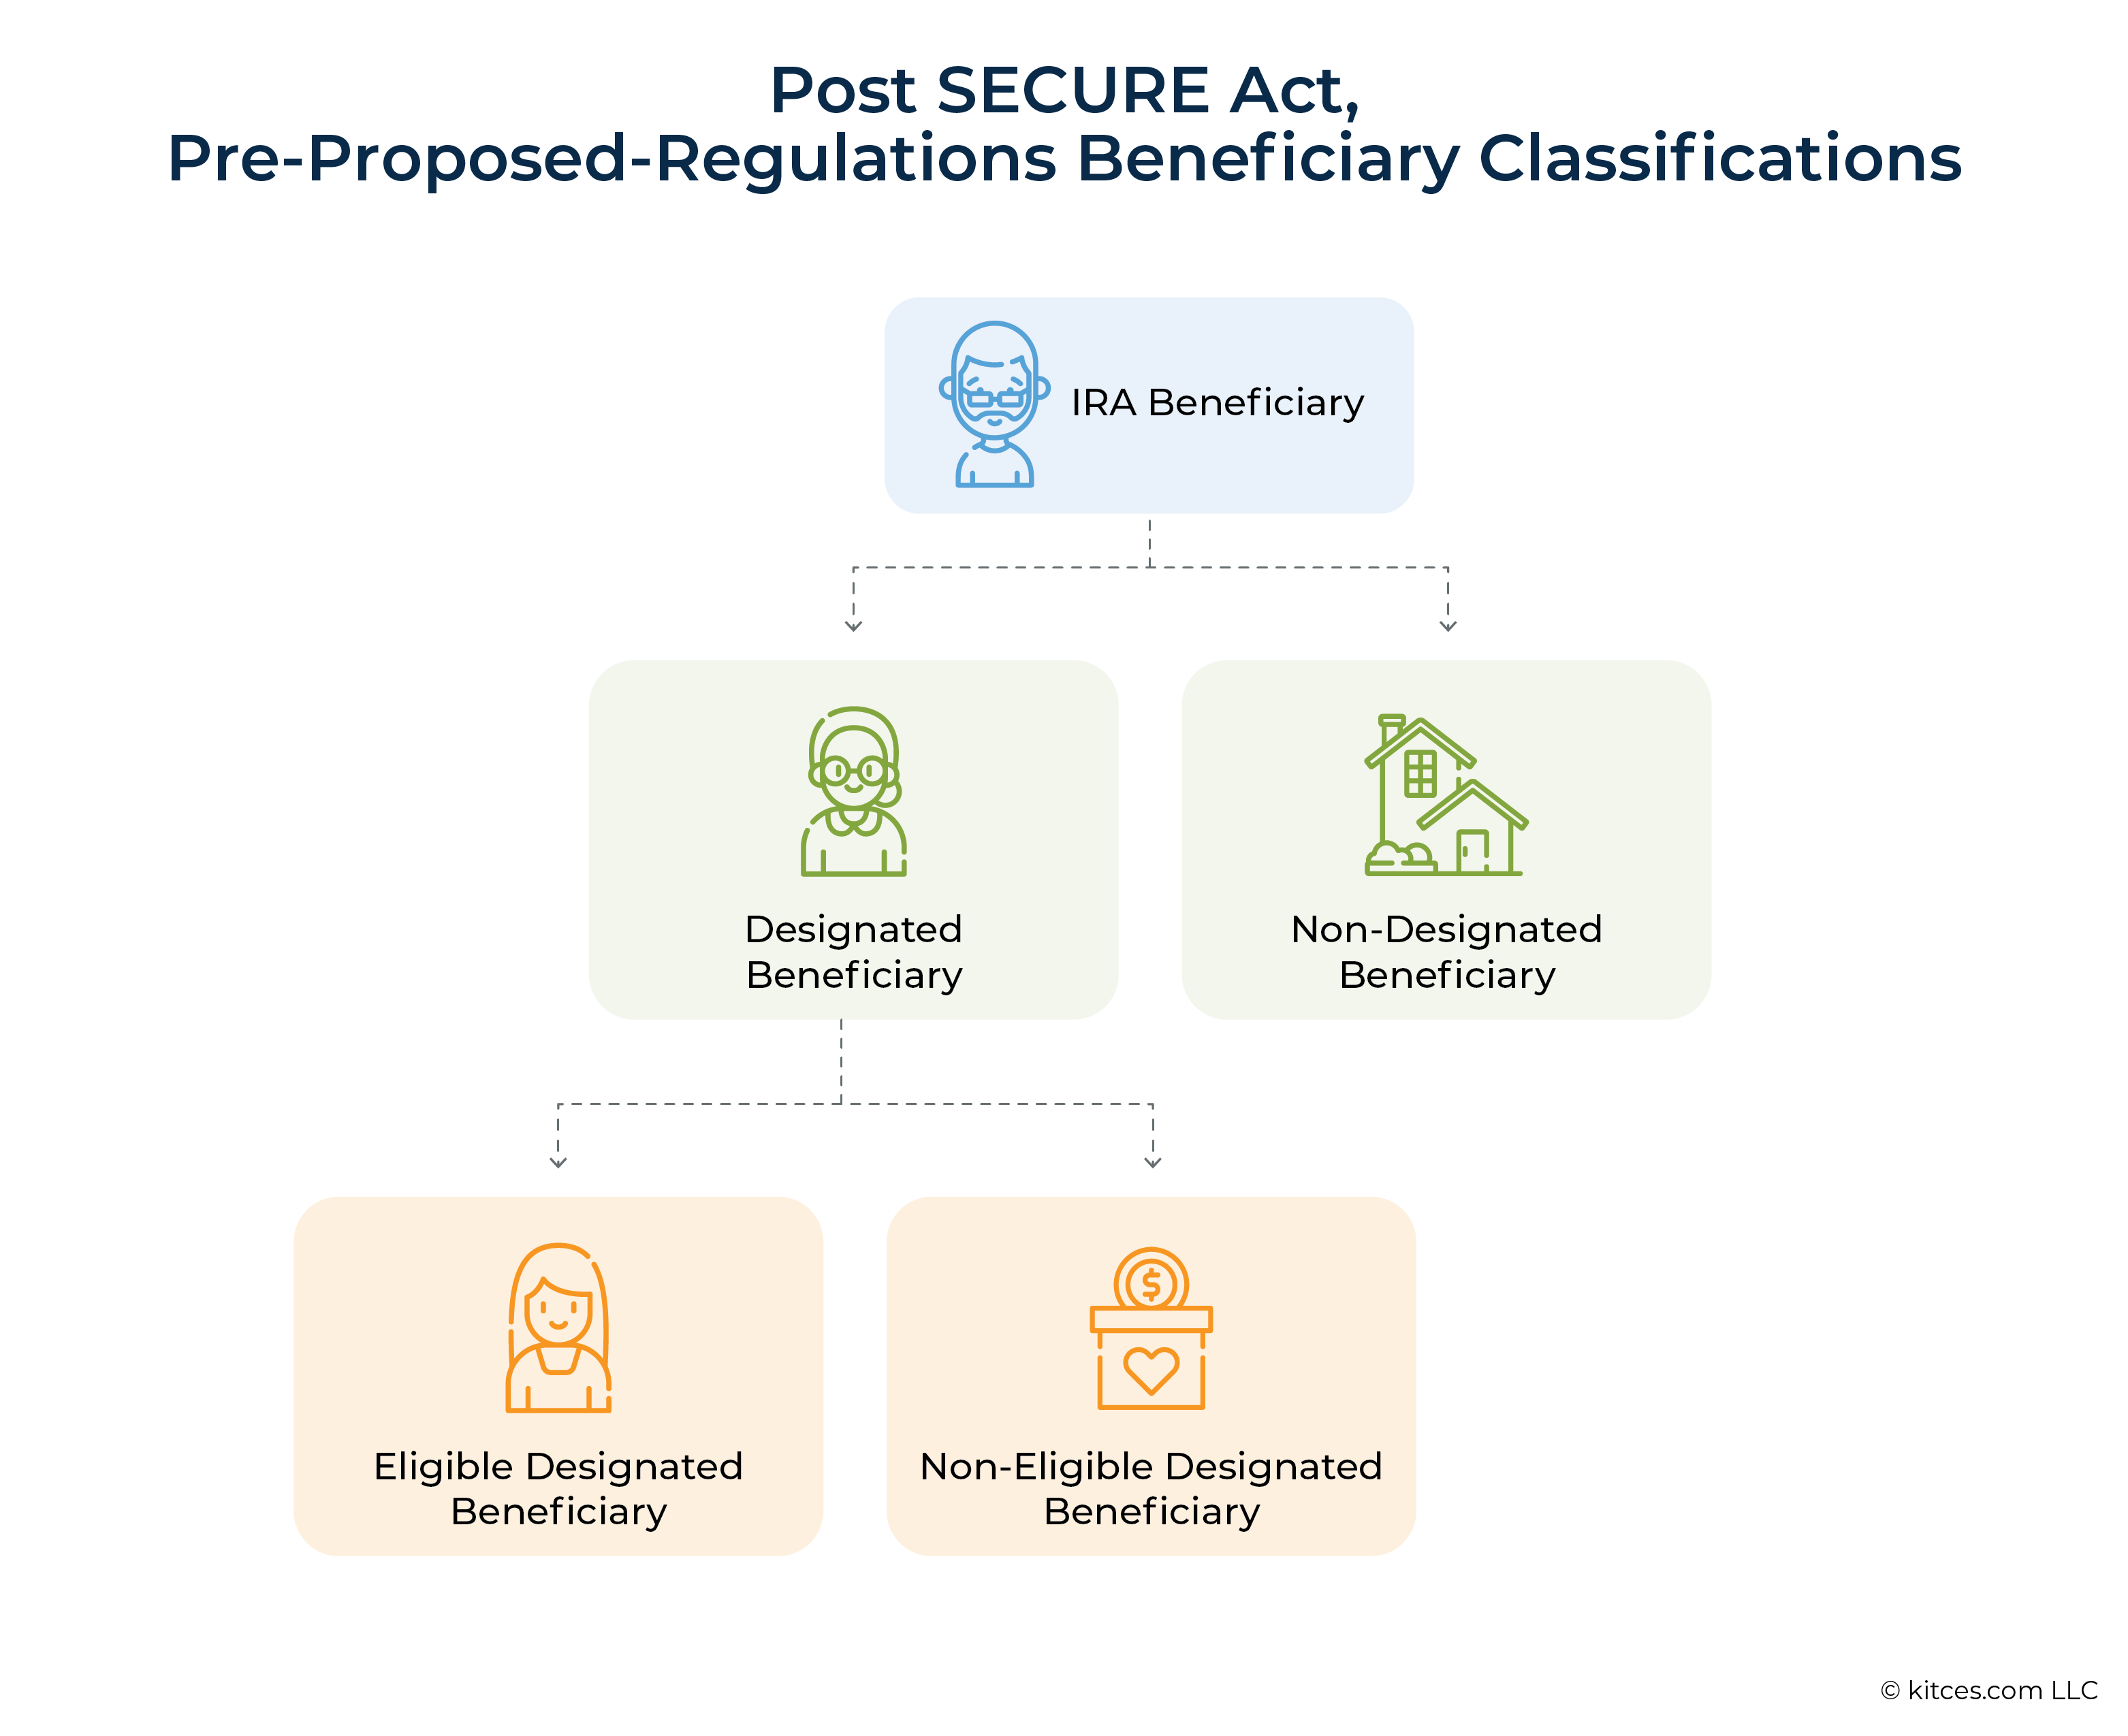 Post SECURE Act Pre Proposed Regulations Beneficiary Classifications